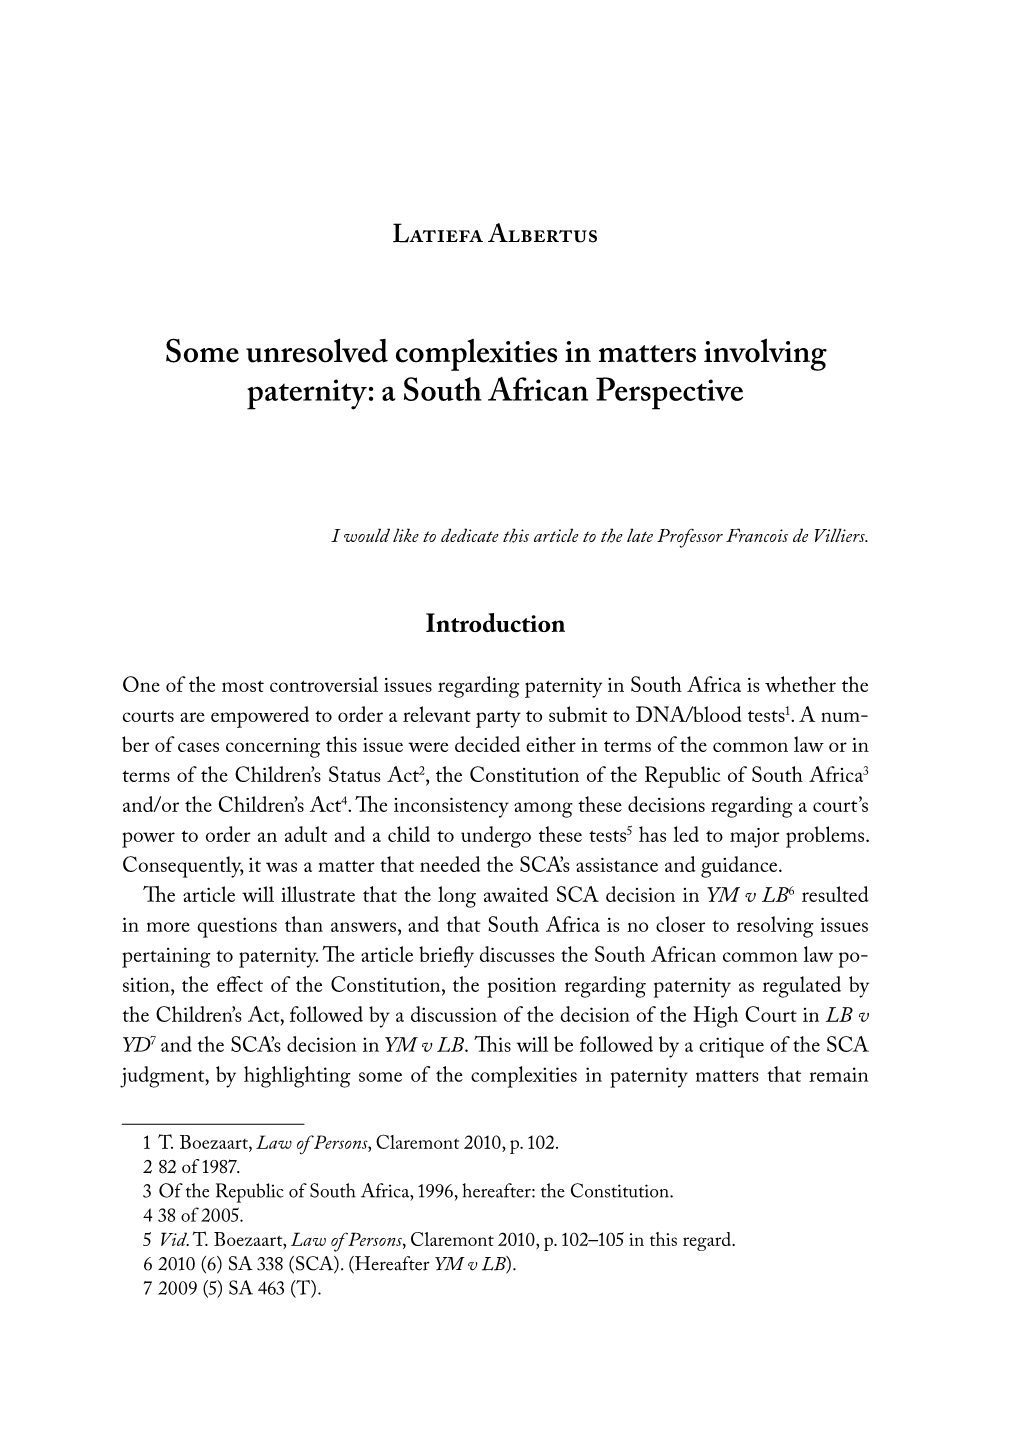 Some Unresolved Complexities in Matters Involving Paternity: a South African Perspective